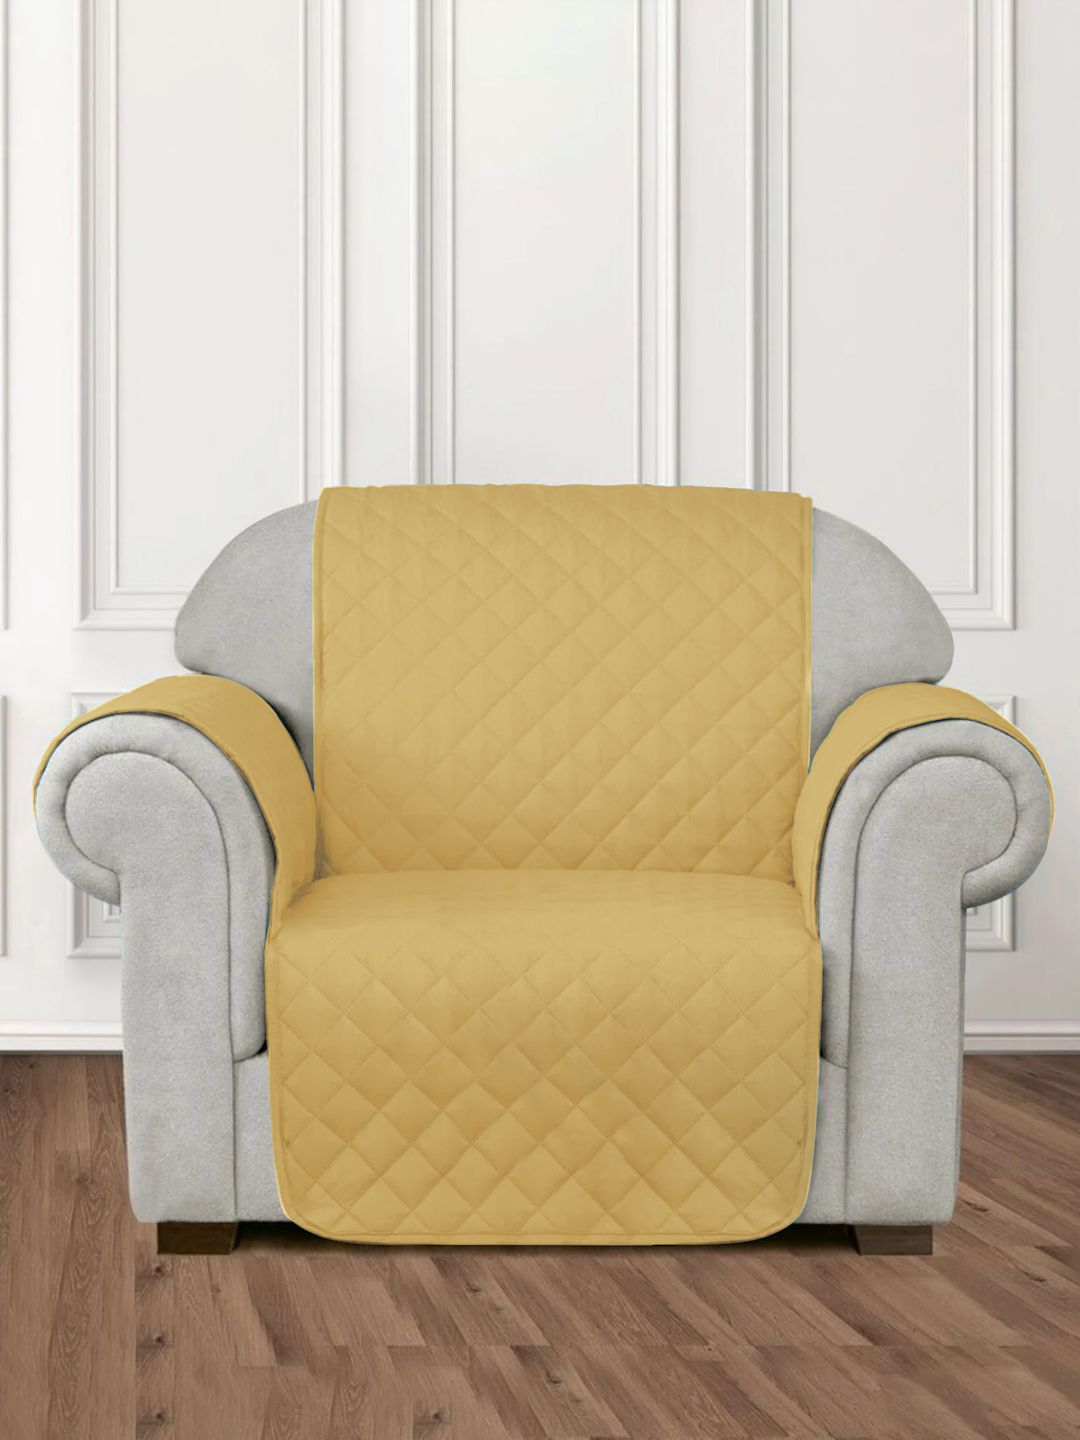 Rajasthan Decor Yellow Quilted Single Seater Sofa Cover Price in India